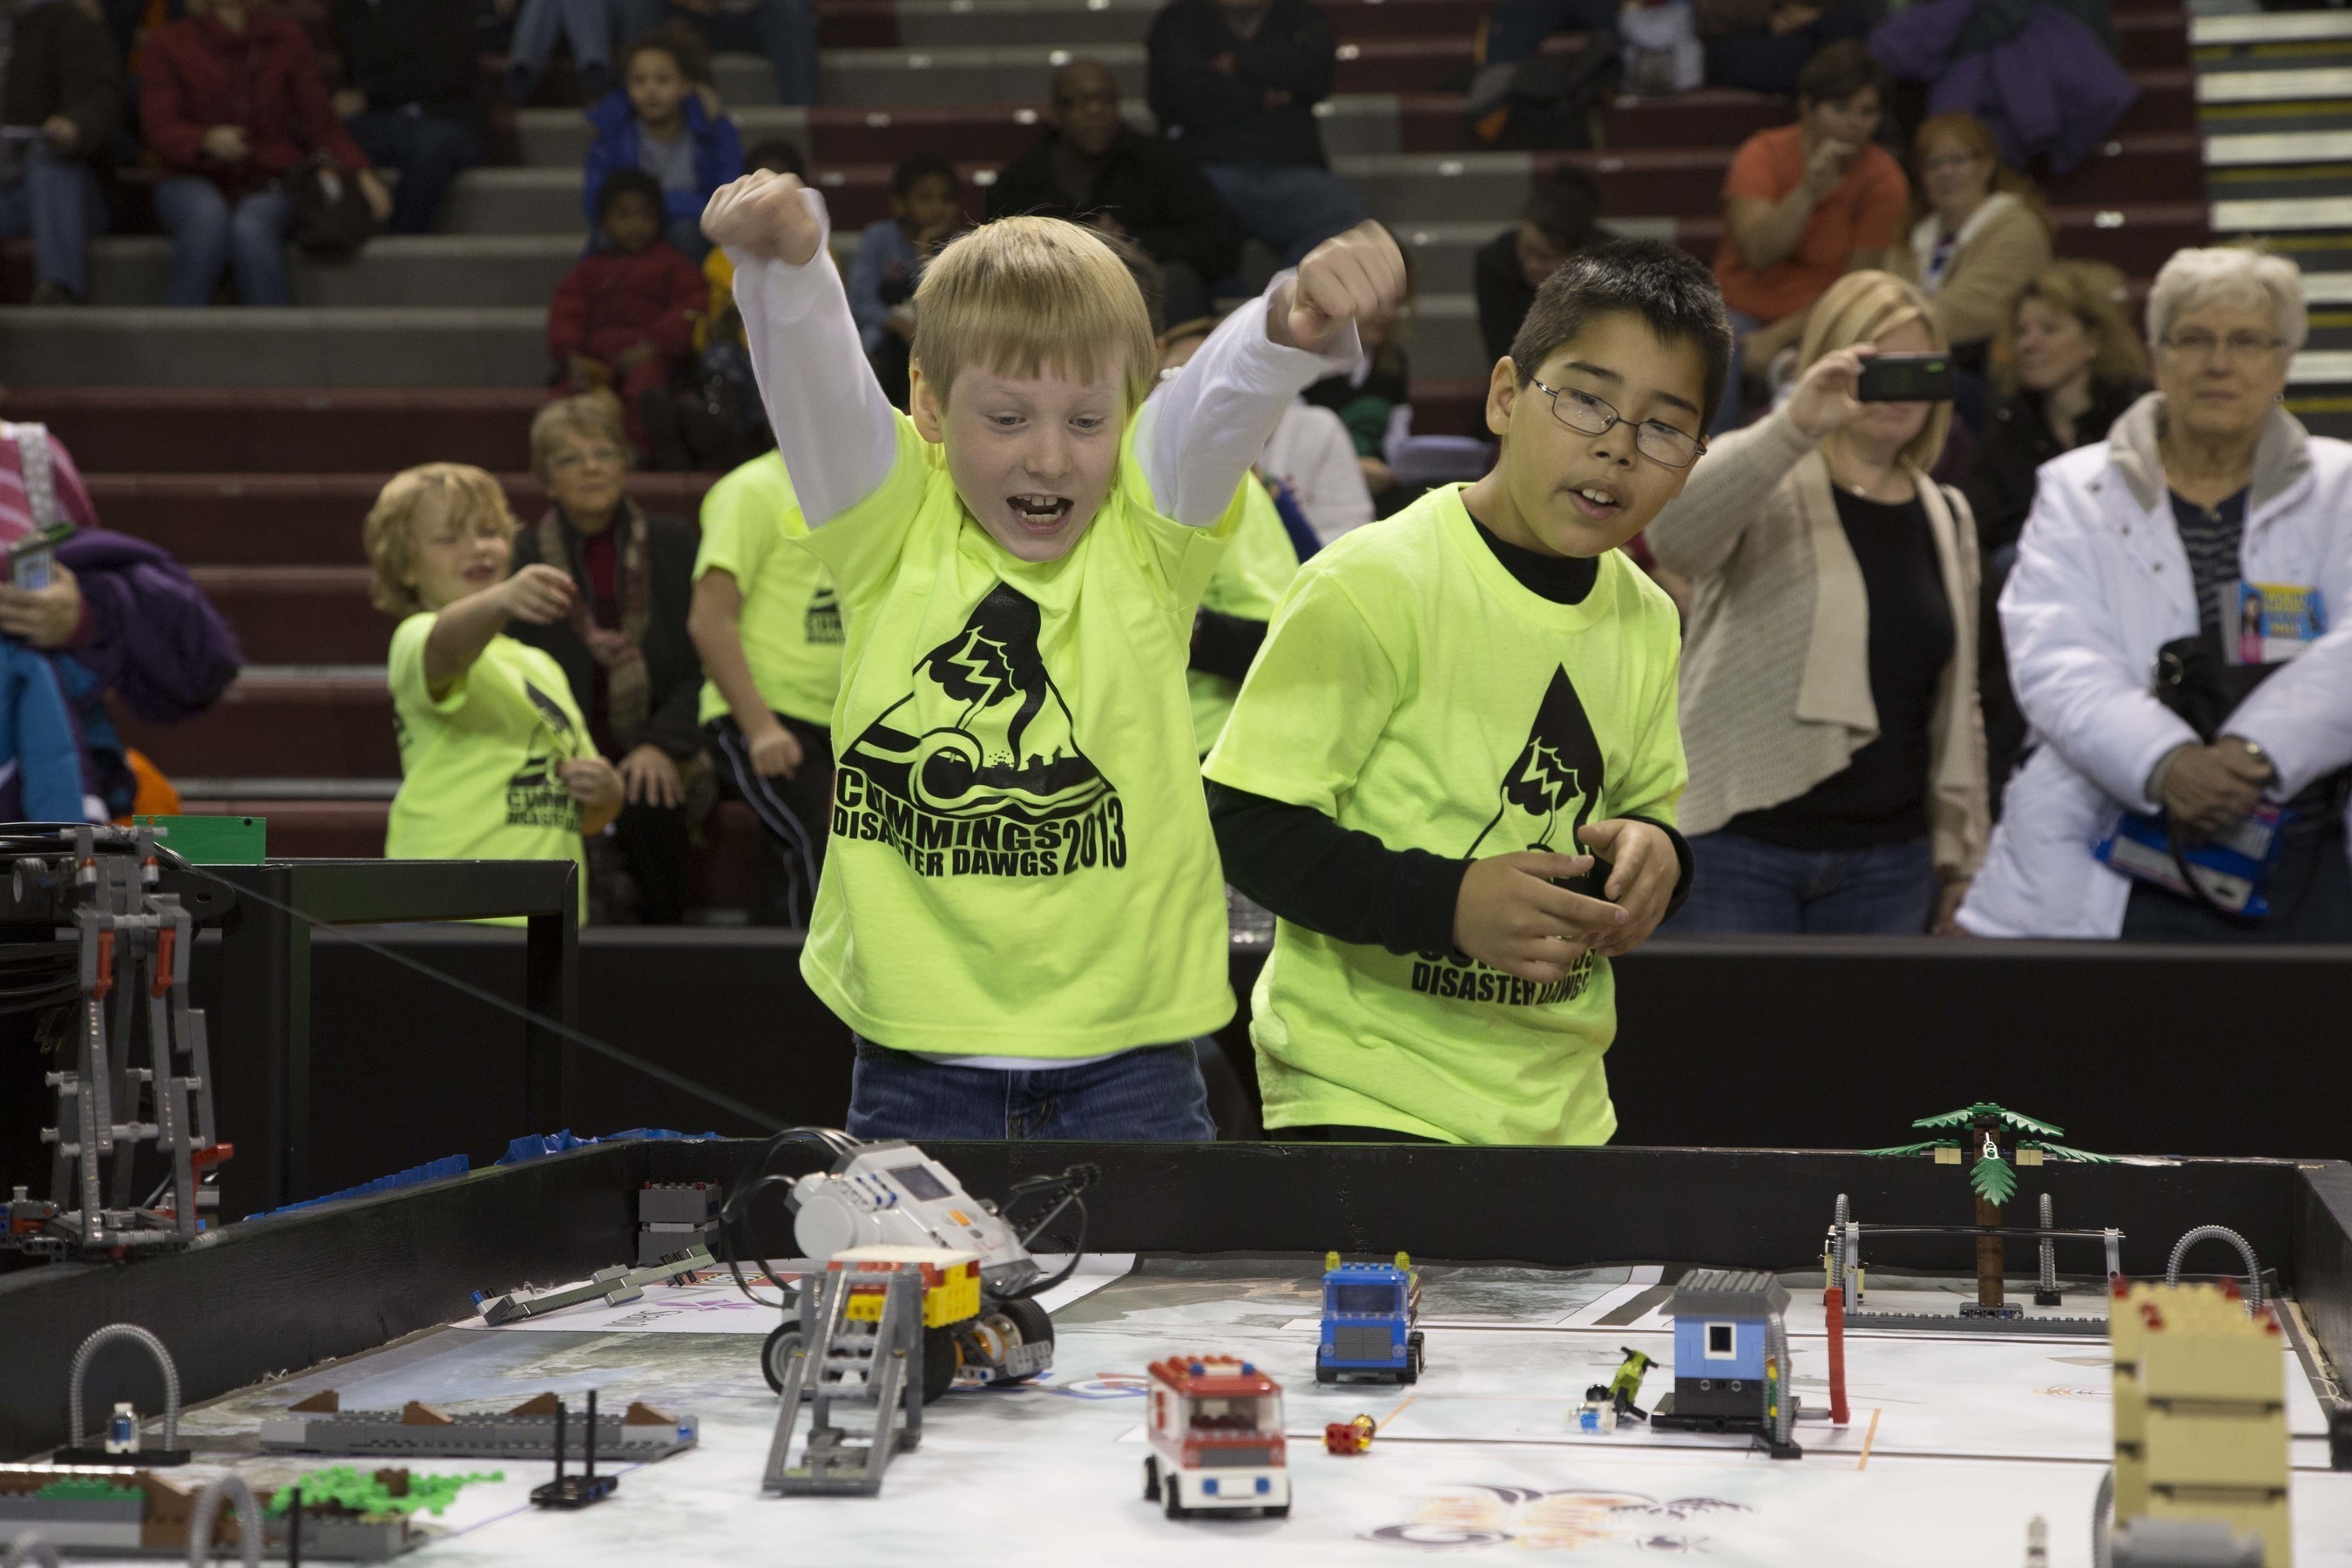 Elementary students from the "Peanut Butter" team prepare their robot for a competition run.